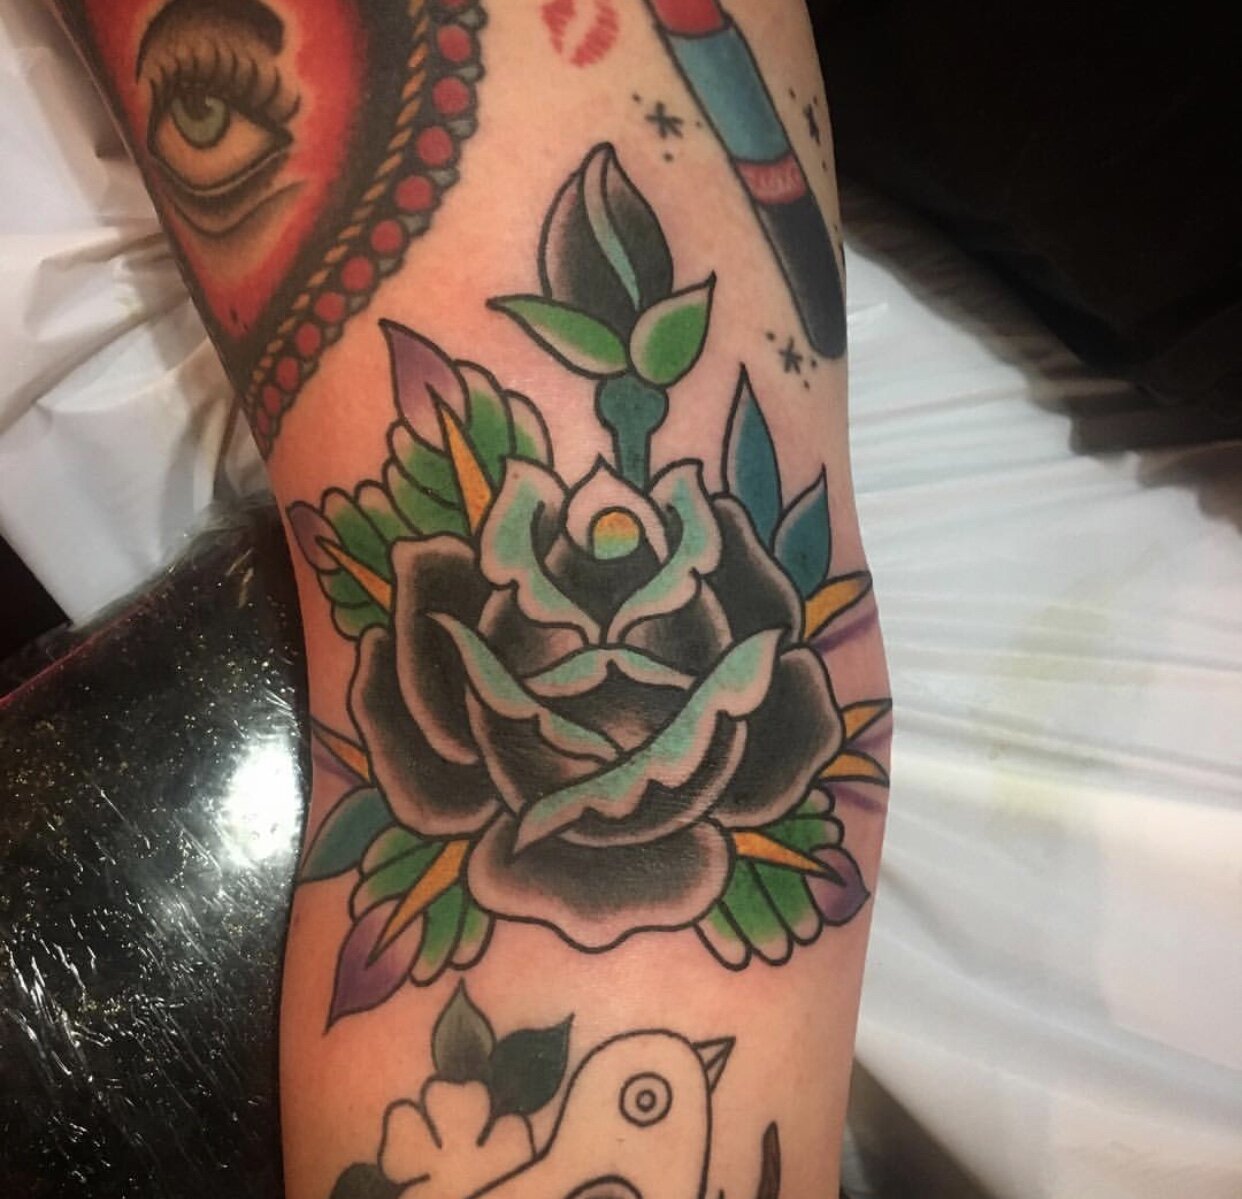 Traditional rose tattoo by Andrew Patch at Southern Star Tattoo in Atlanta, Georgia.